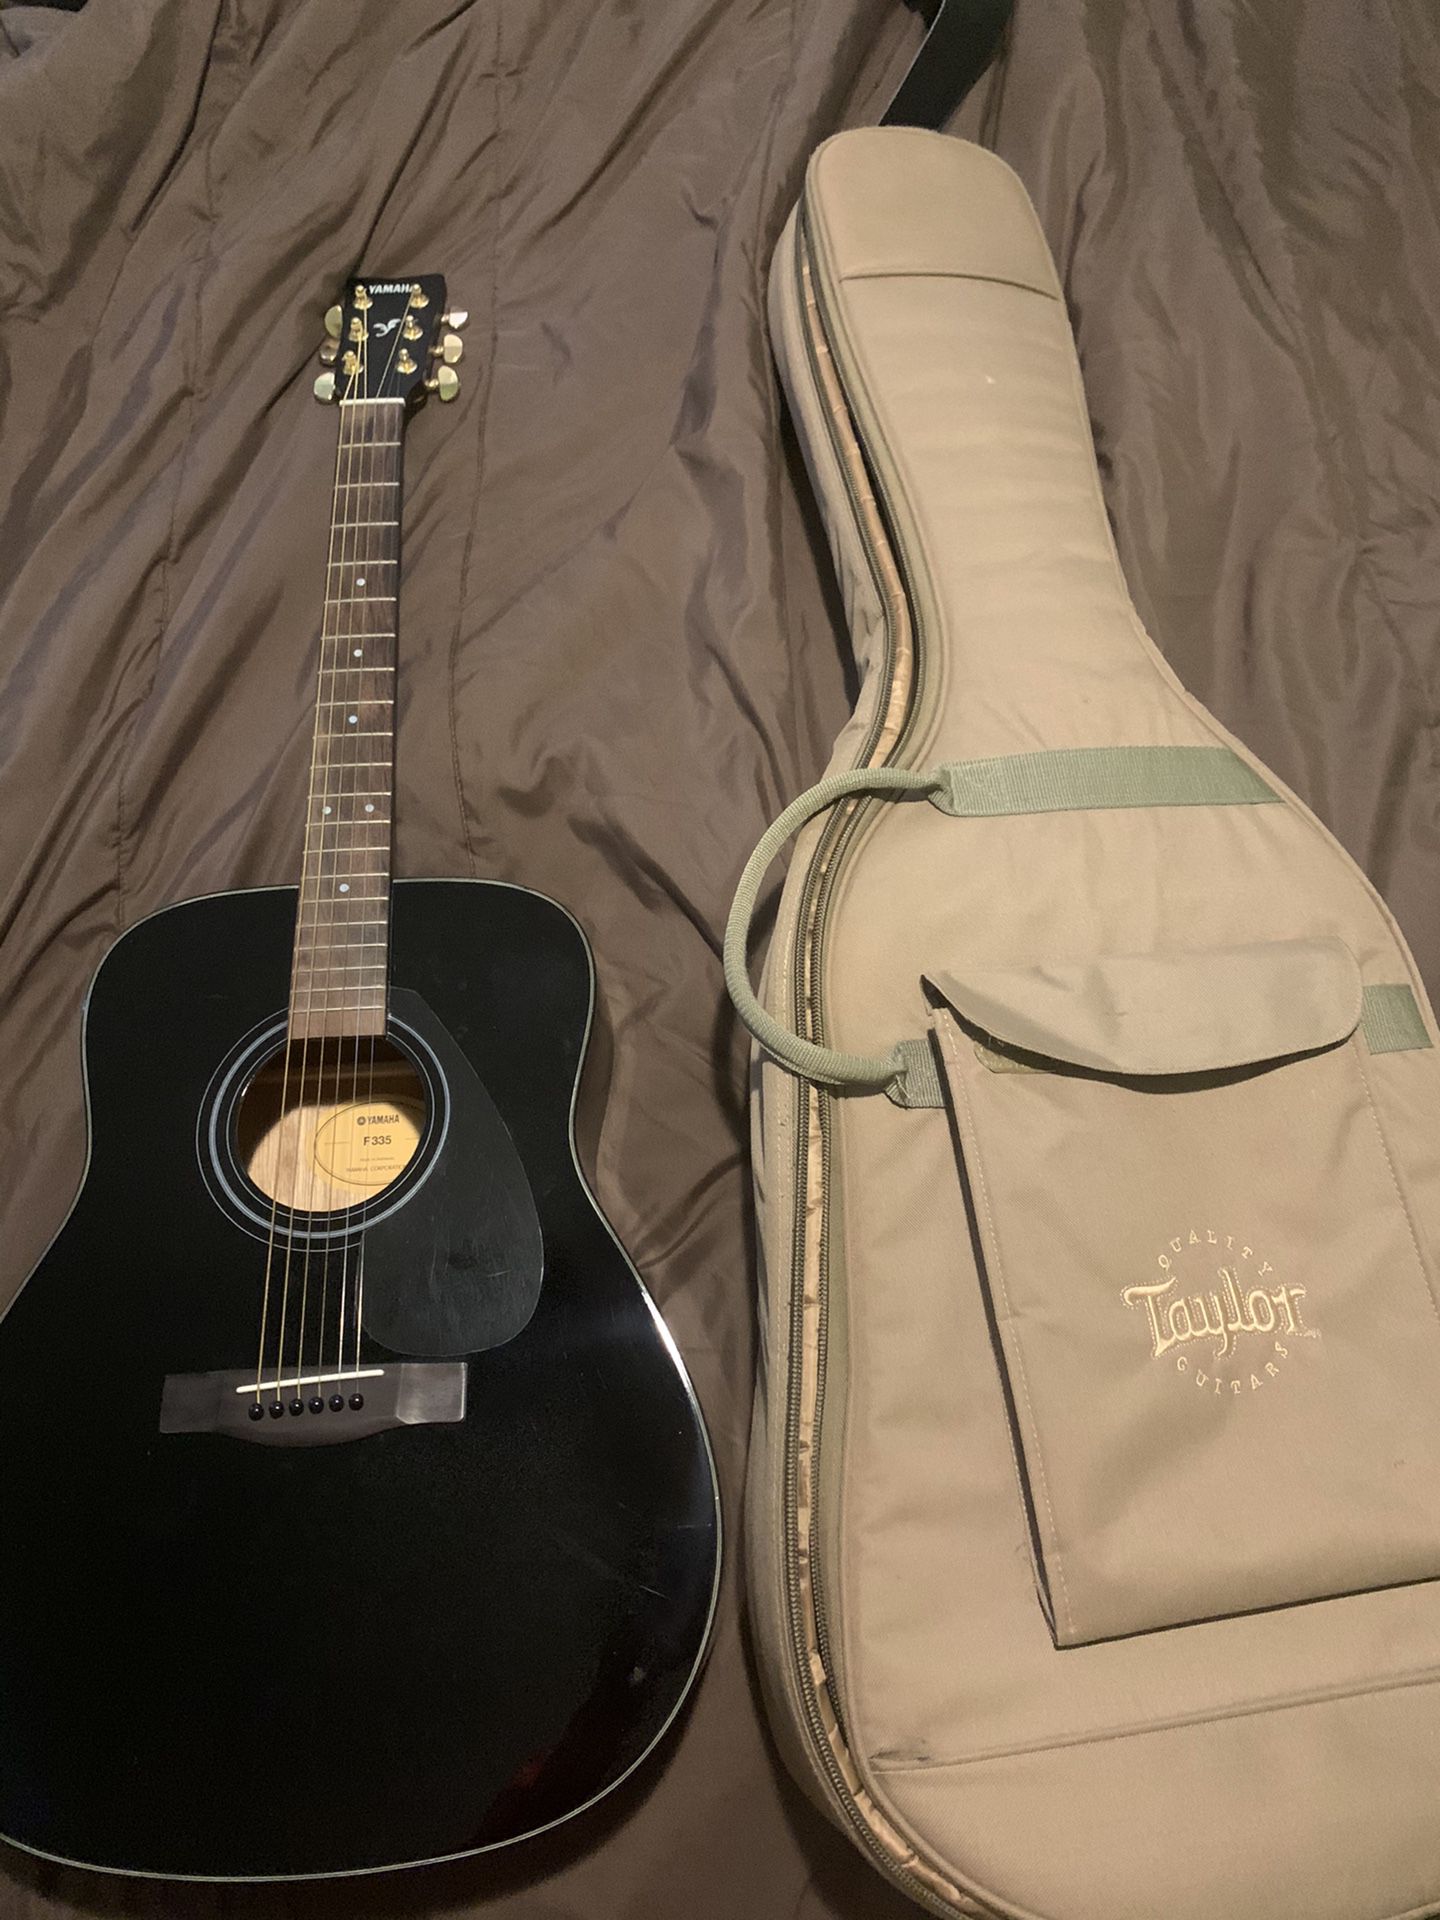 Yamaha acoustic guitar with a Case